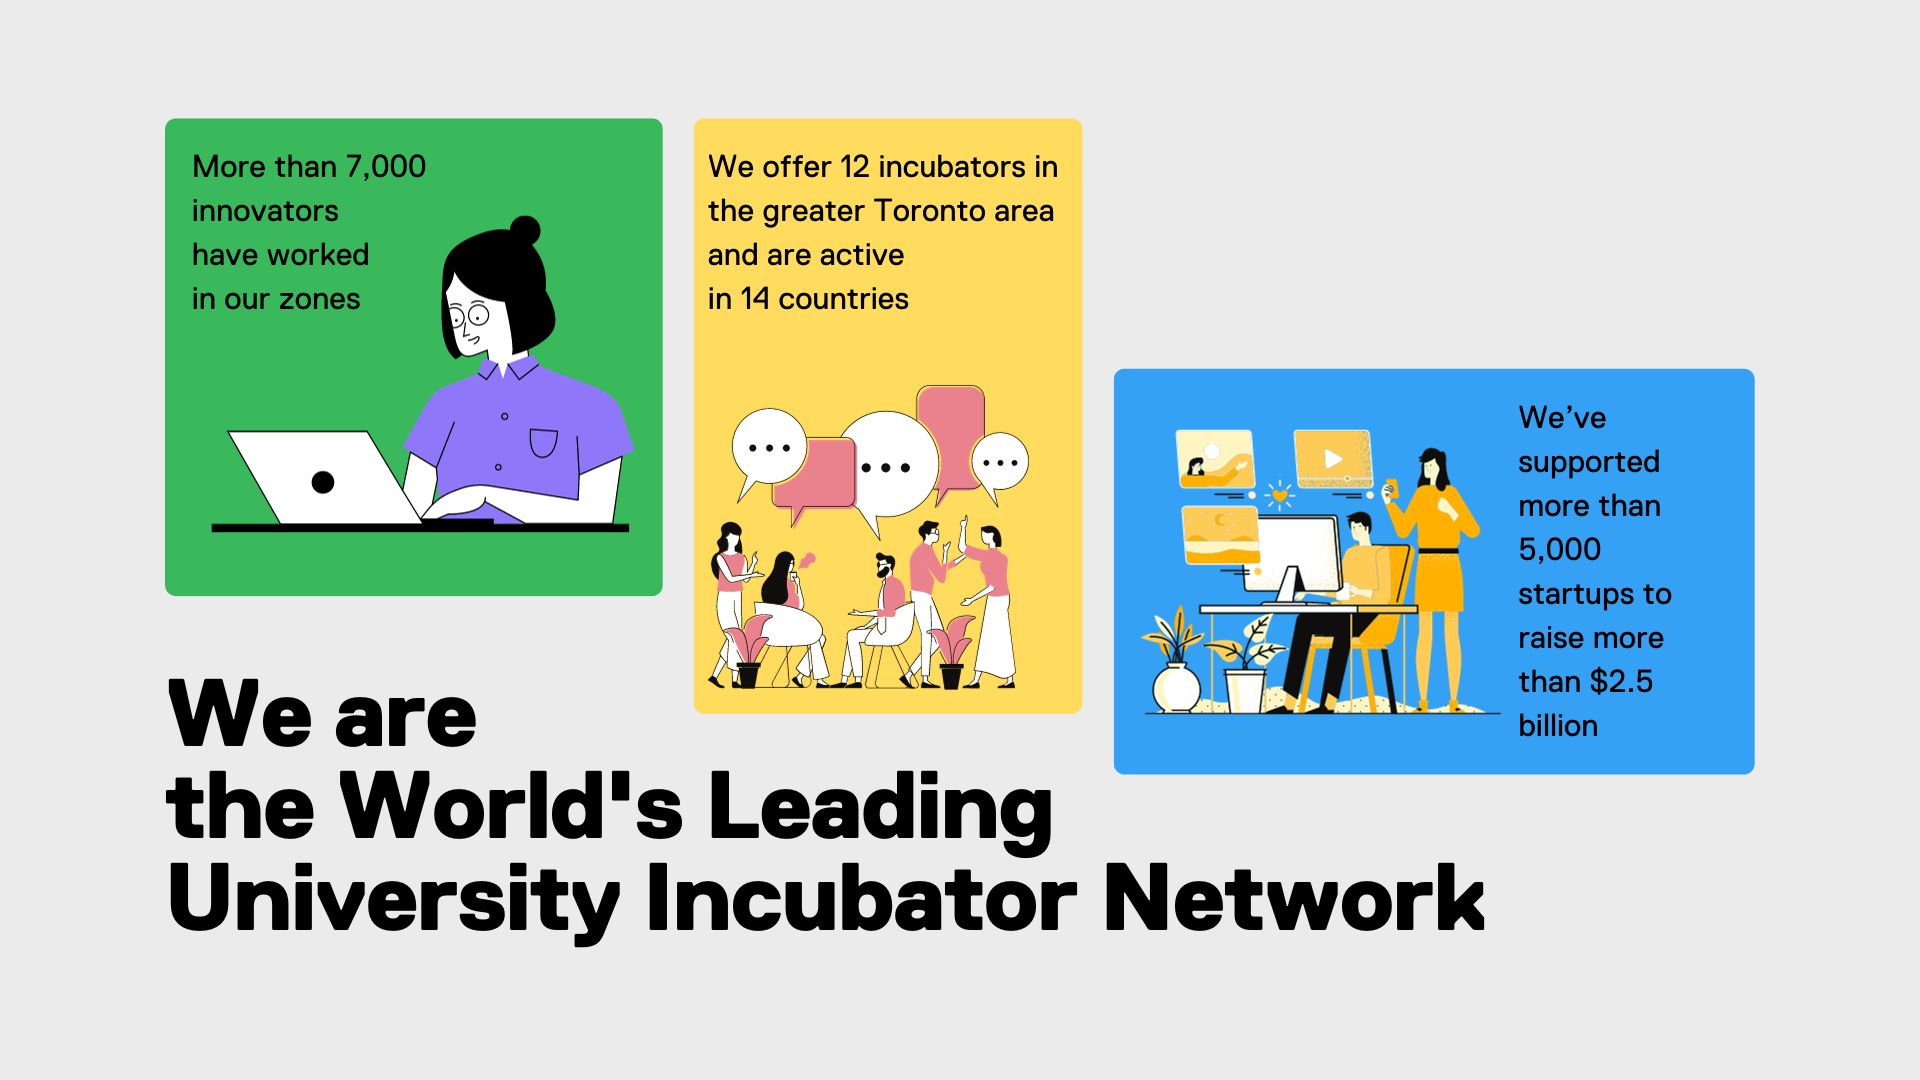 Infographic with 3 coloured squares with text inside. Under the three boxes there is a main heading that says "We are the World's Leading University Incubator Network." The first box says "More than 5000 innovators have worked in our zones." The second box says "We offer 12 incubators in the Great Toronto Area and are active in 14 countries." The third box says "We’ve supported more than 5,000 startups to raise more than $2.5 billion."